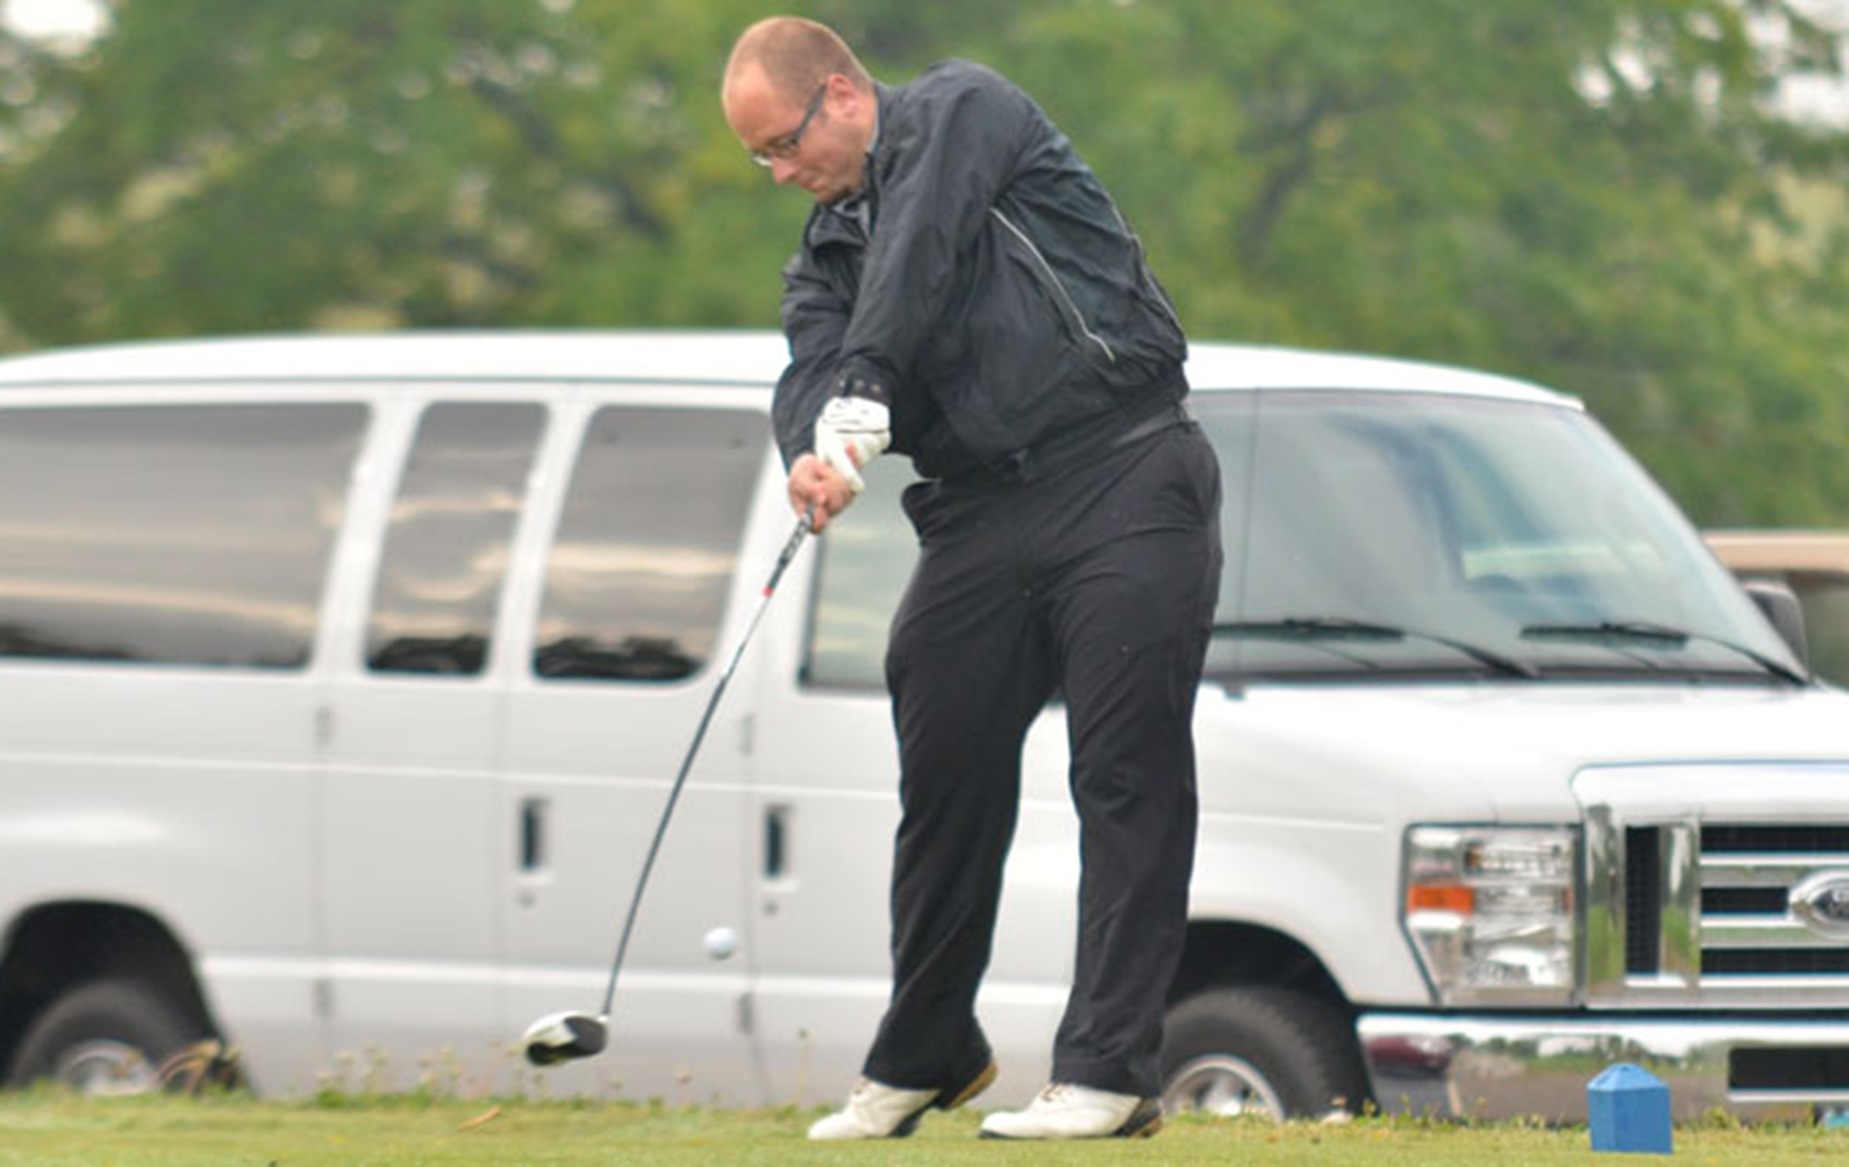 Men's golf opens up 2013-14 season with Transy Invitational